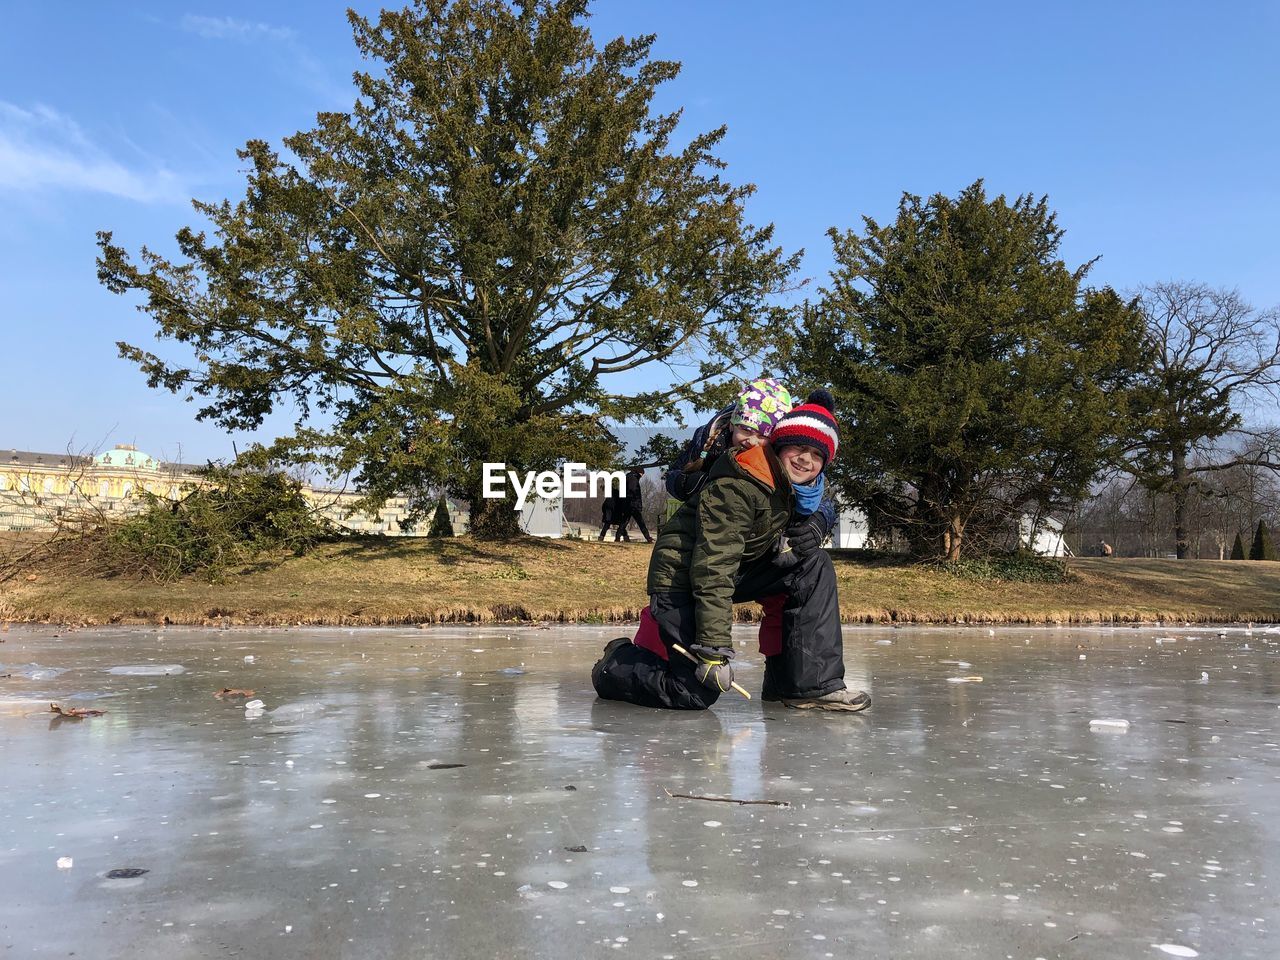 Portrait of smiling brothers on frozen lake against trees